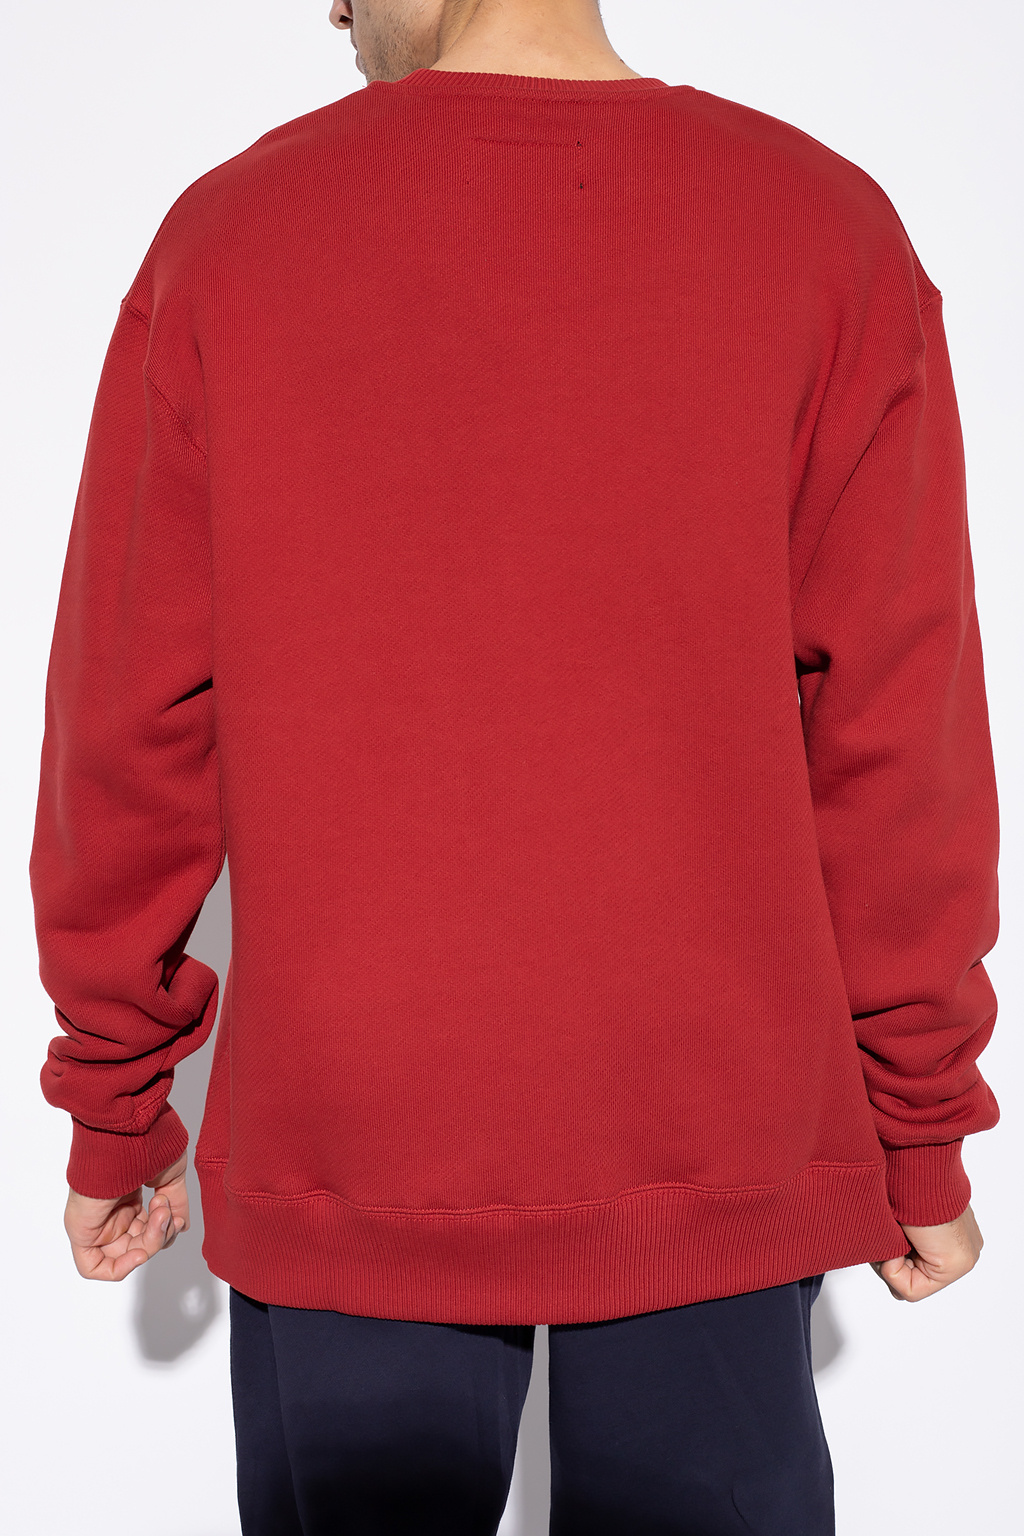 A-COLD-WALL* Logo-embroidered Face sweatshirt